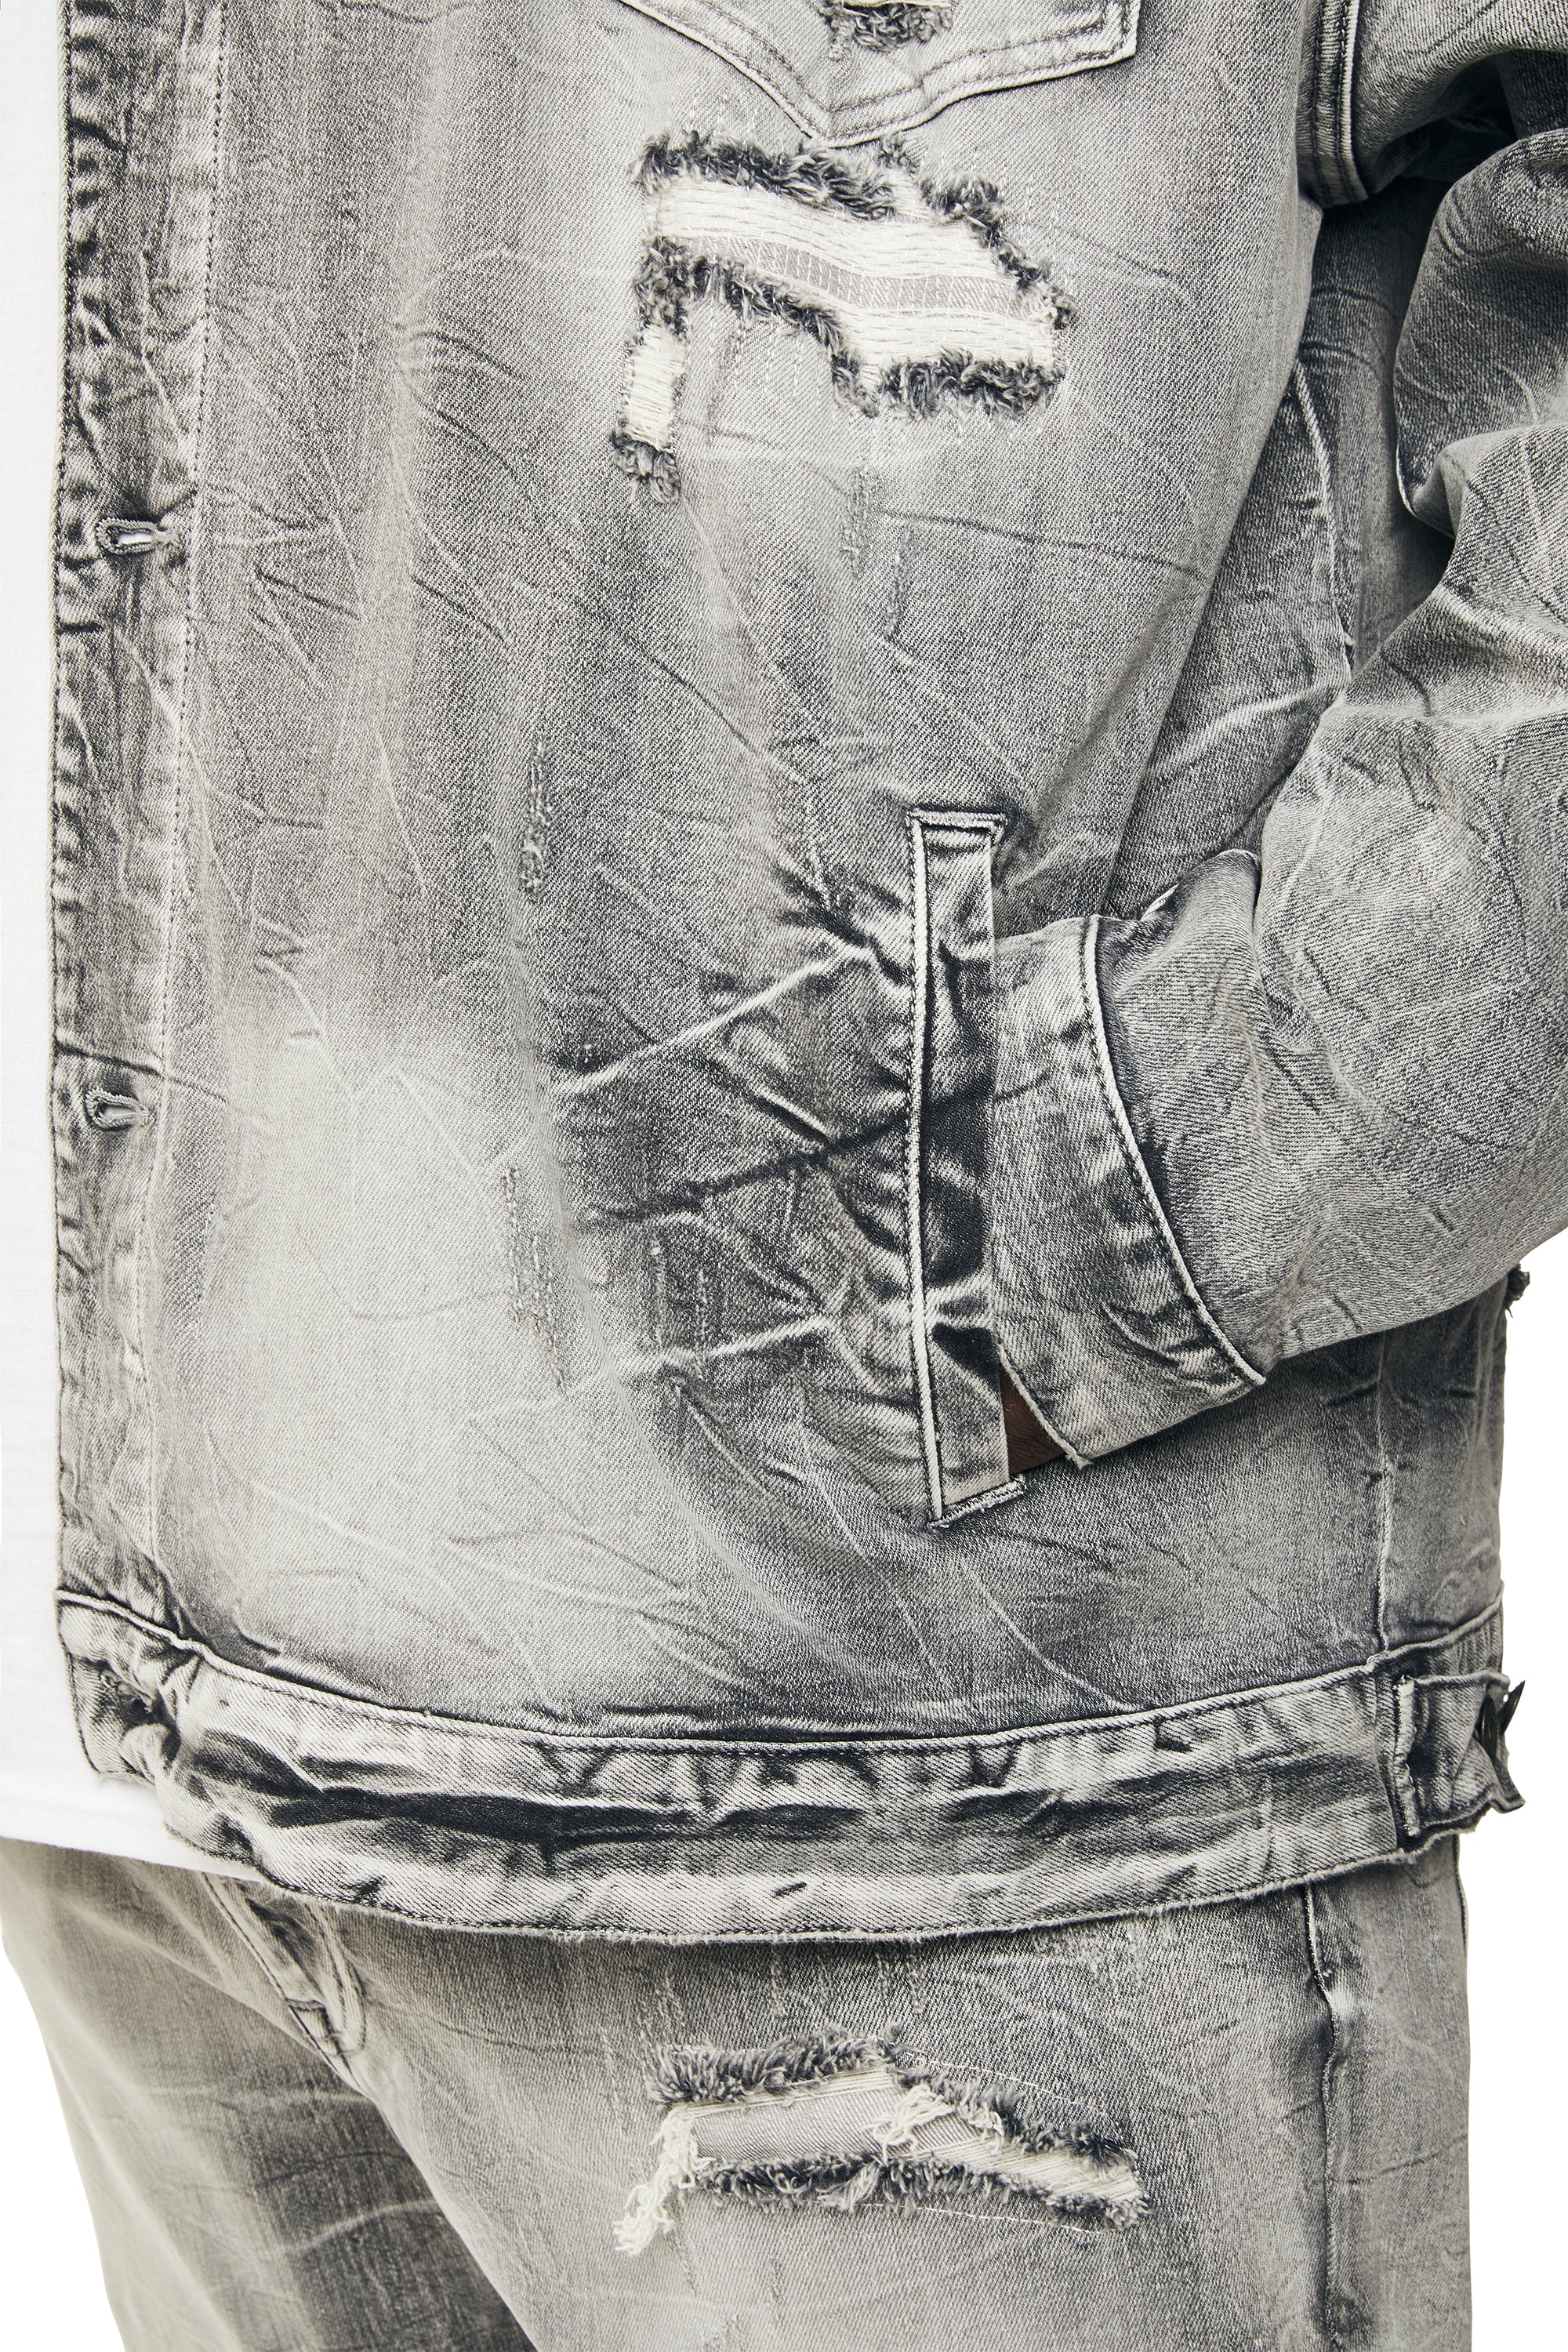 Big and Tall - Wave Effect Jean Jacket - Union Grey